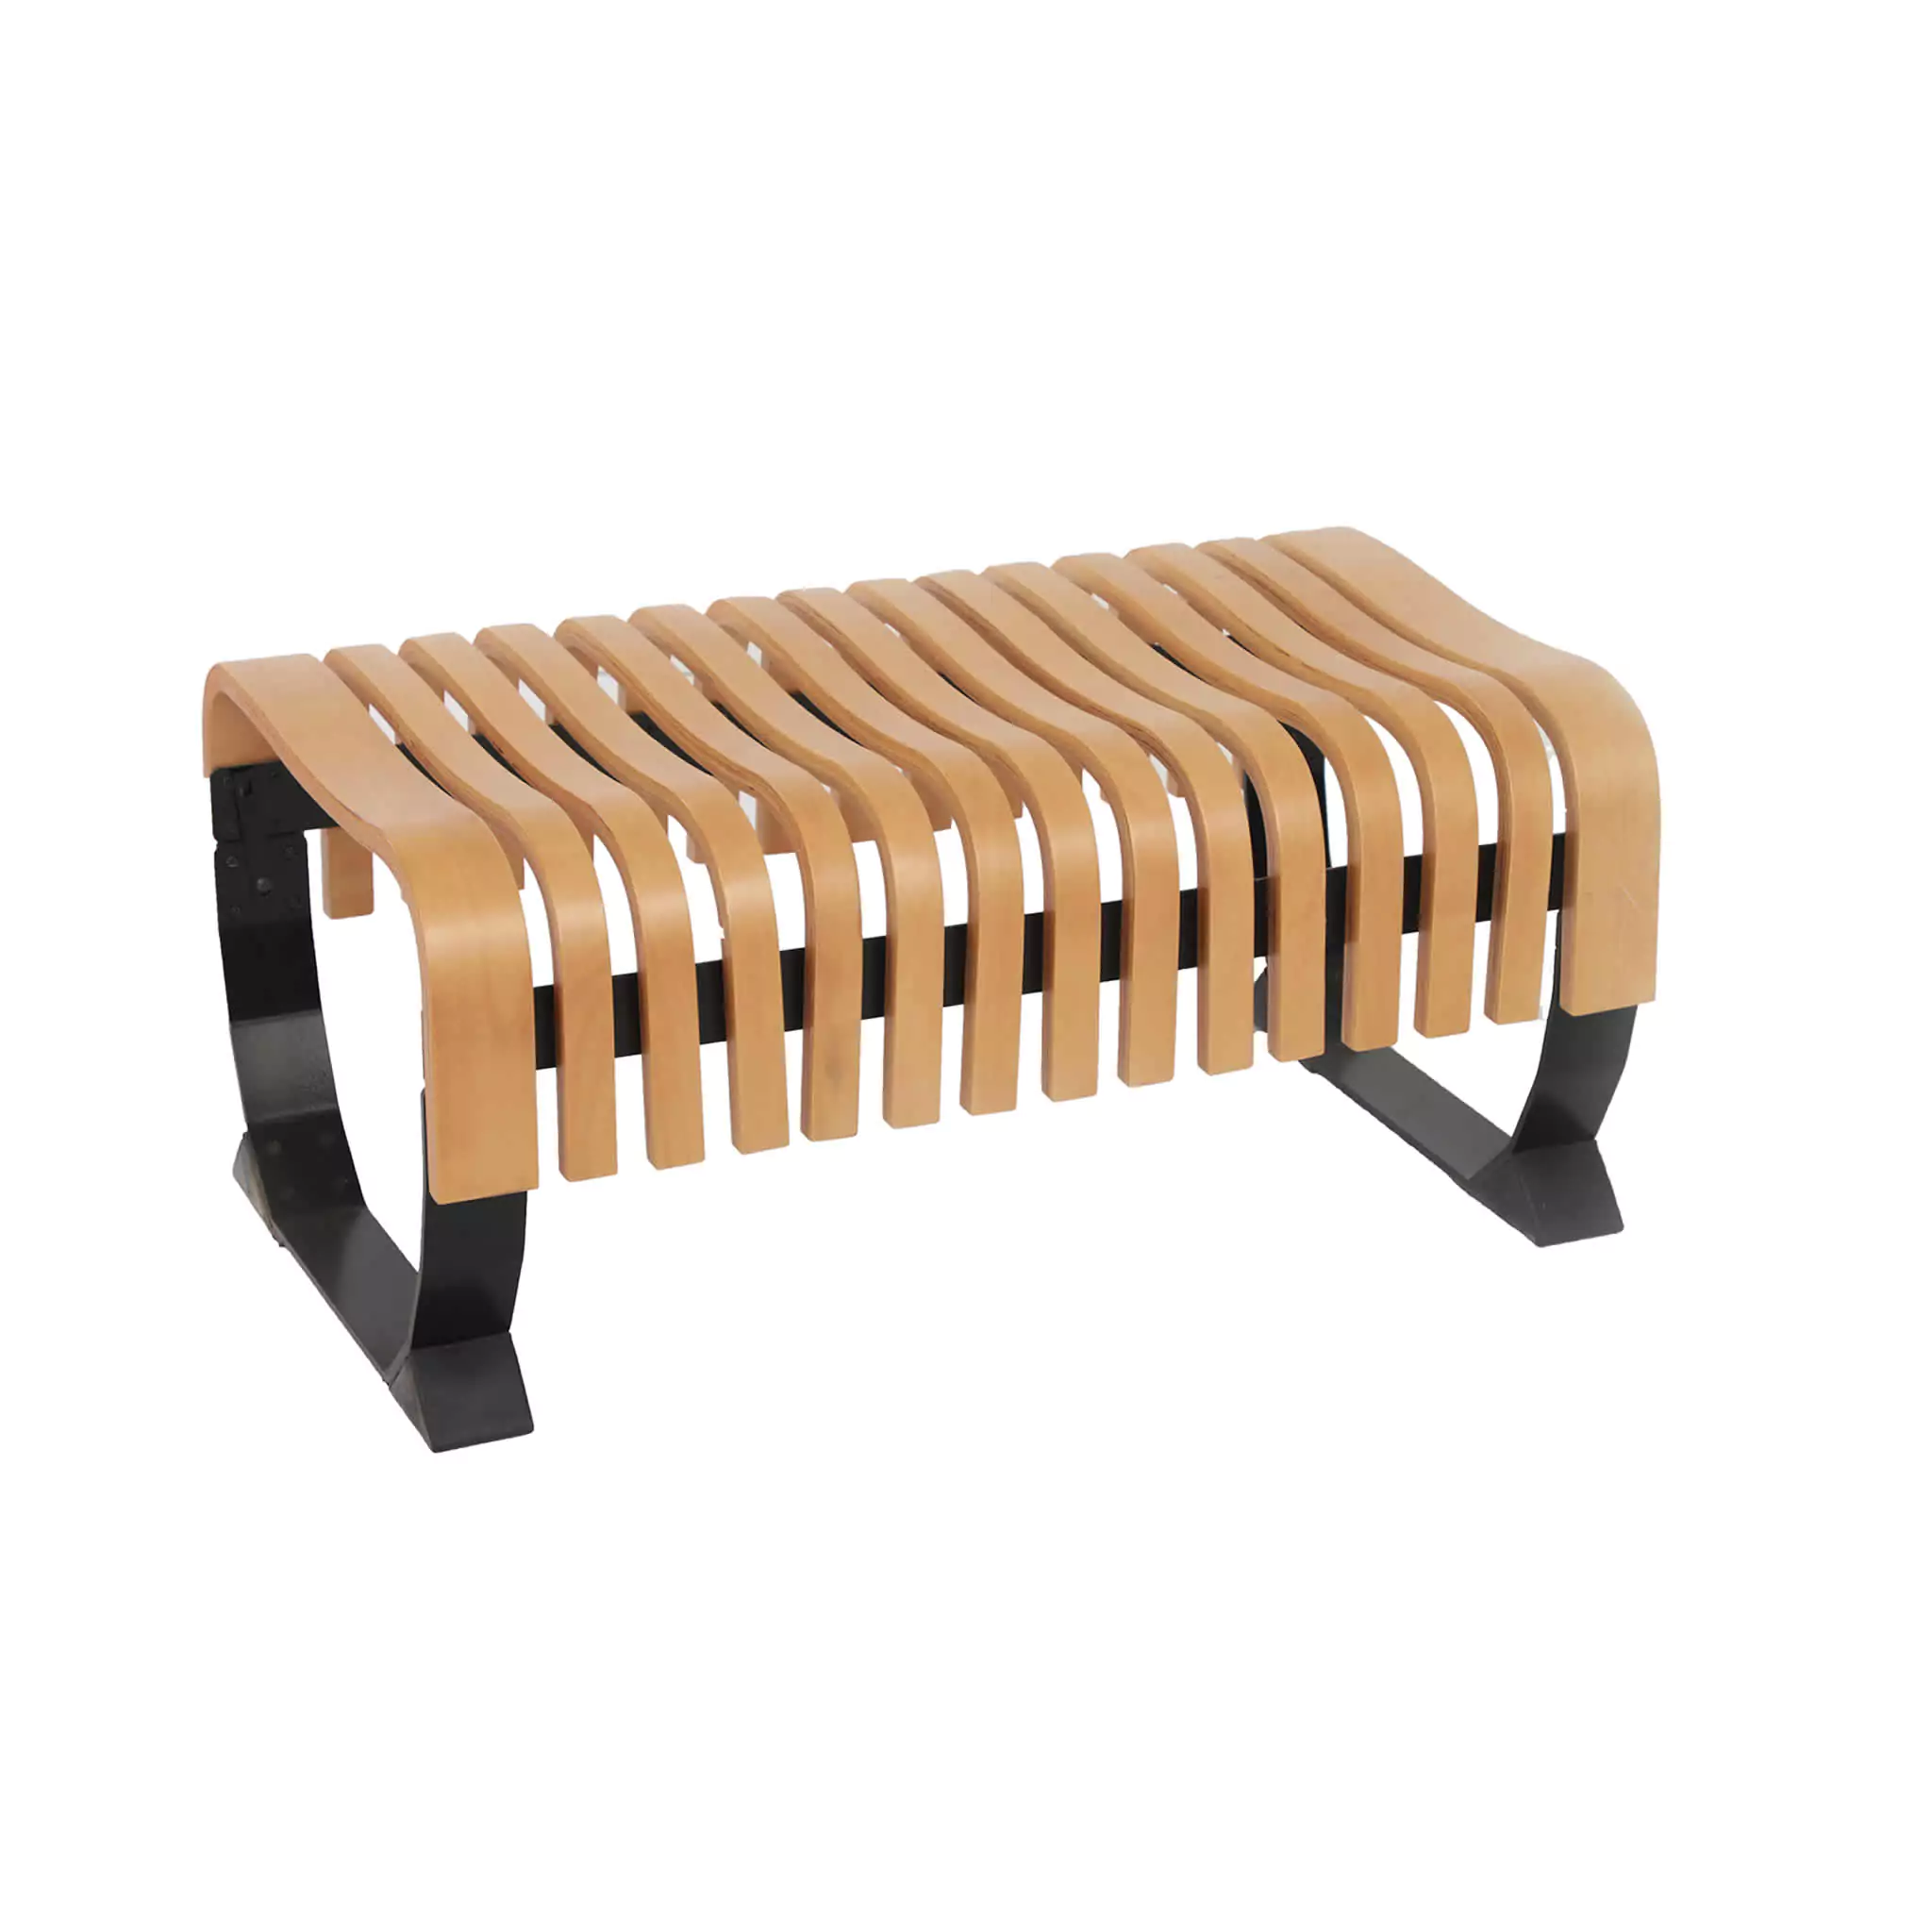 Simko Seating Products Foyer Wooden Bench